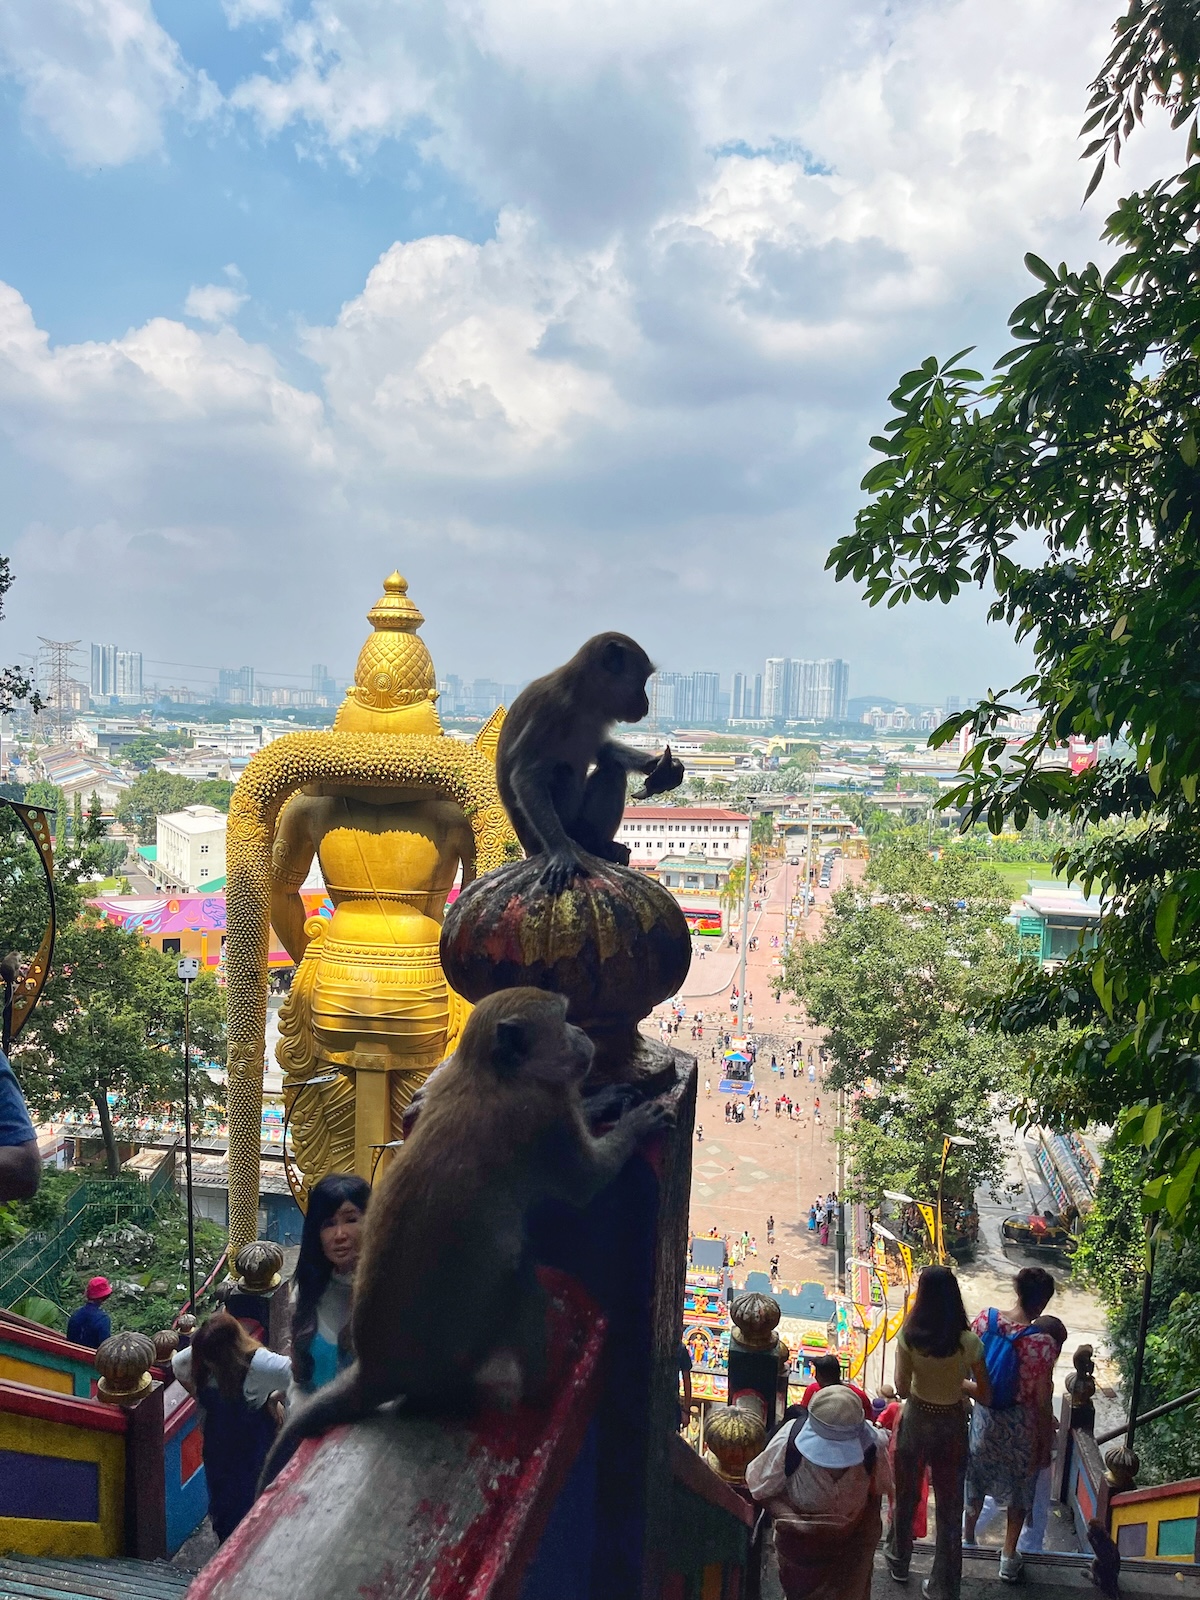 View from the Batu Caves in Malaysia, featuring two monkeys sitting on the colorful staircase railings with the golden statue of Lord Murugan and the cityscape in the background. Visitors are seen climbing the stairs, enhancing the lively atmosphere of the site.